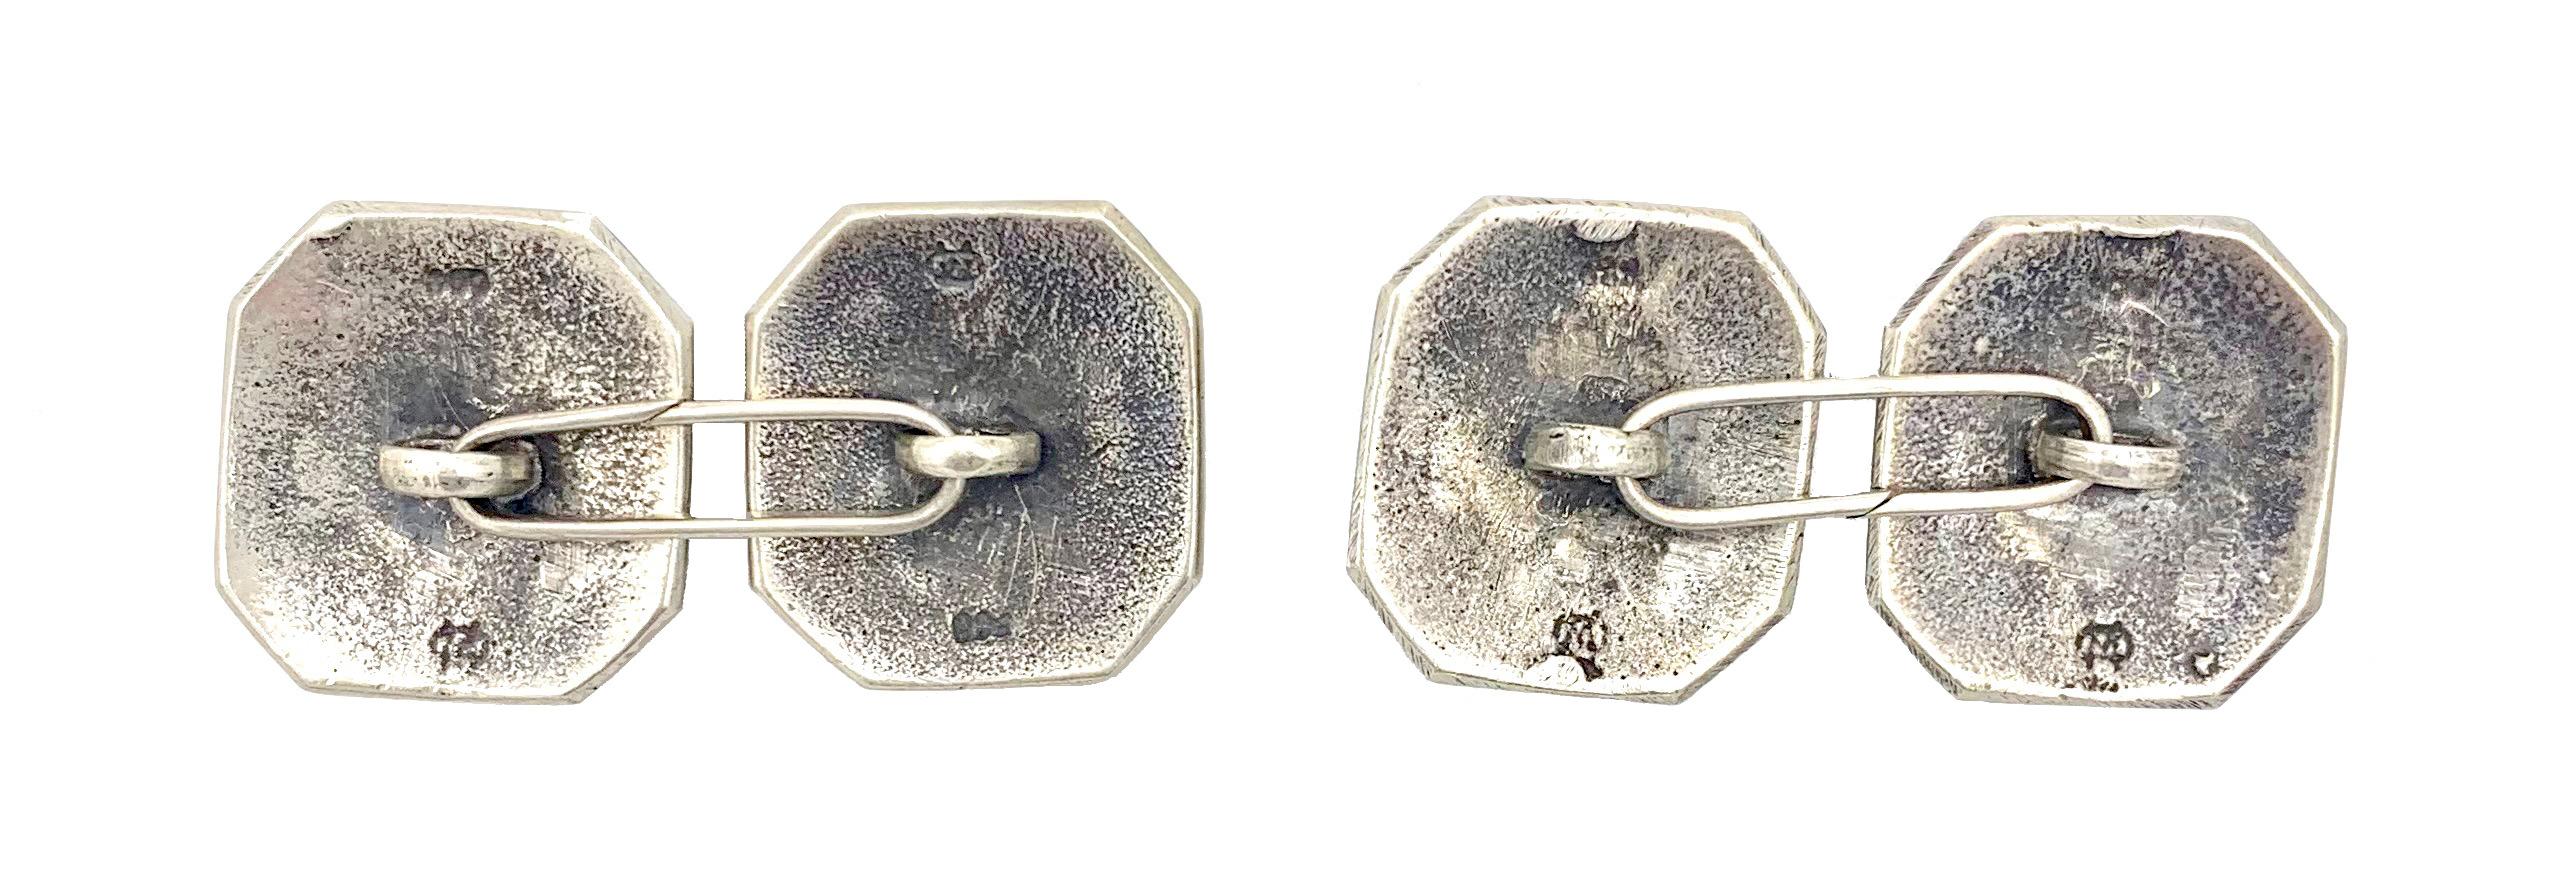 Thi s elegant pair of cufflinks features a raised carved leave design  on  a blackend background within a doubleedged octagonal boarder.
The litigated imaker's initials have yet to be identified. 